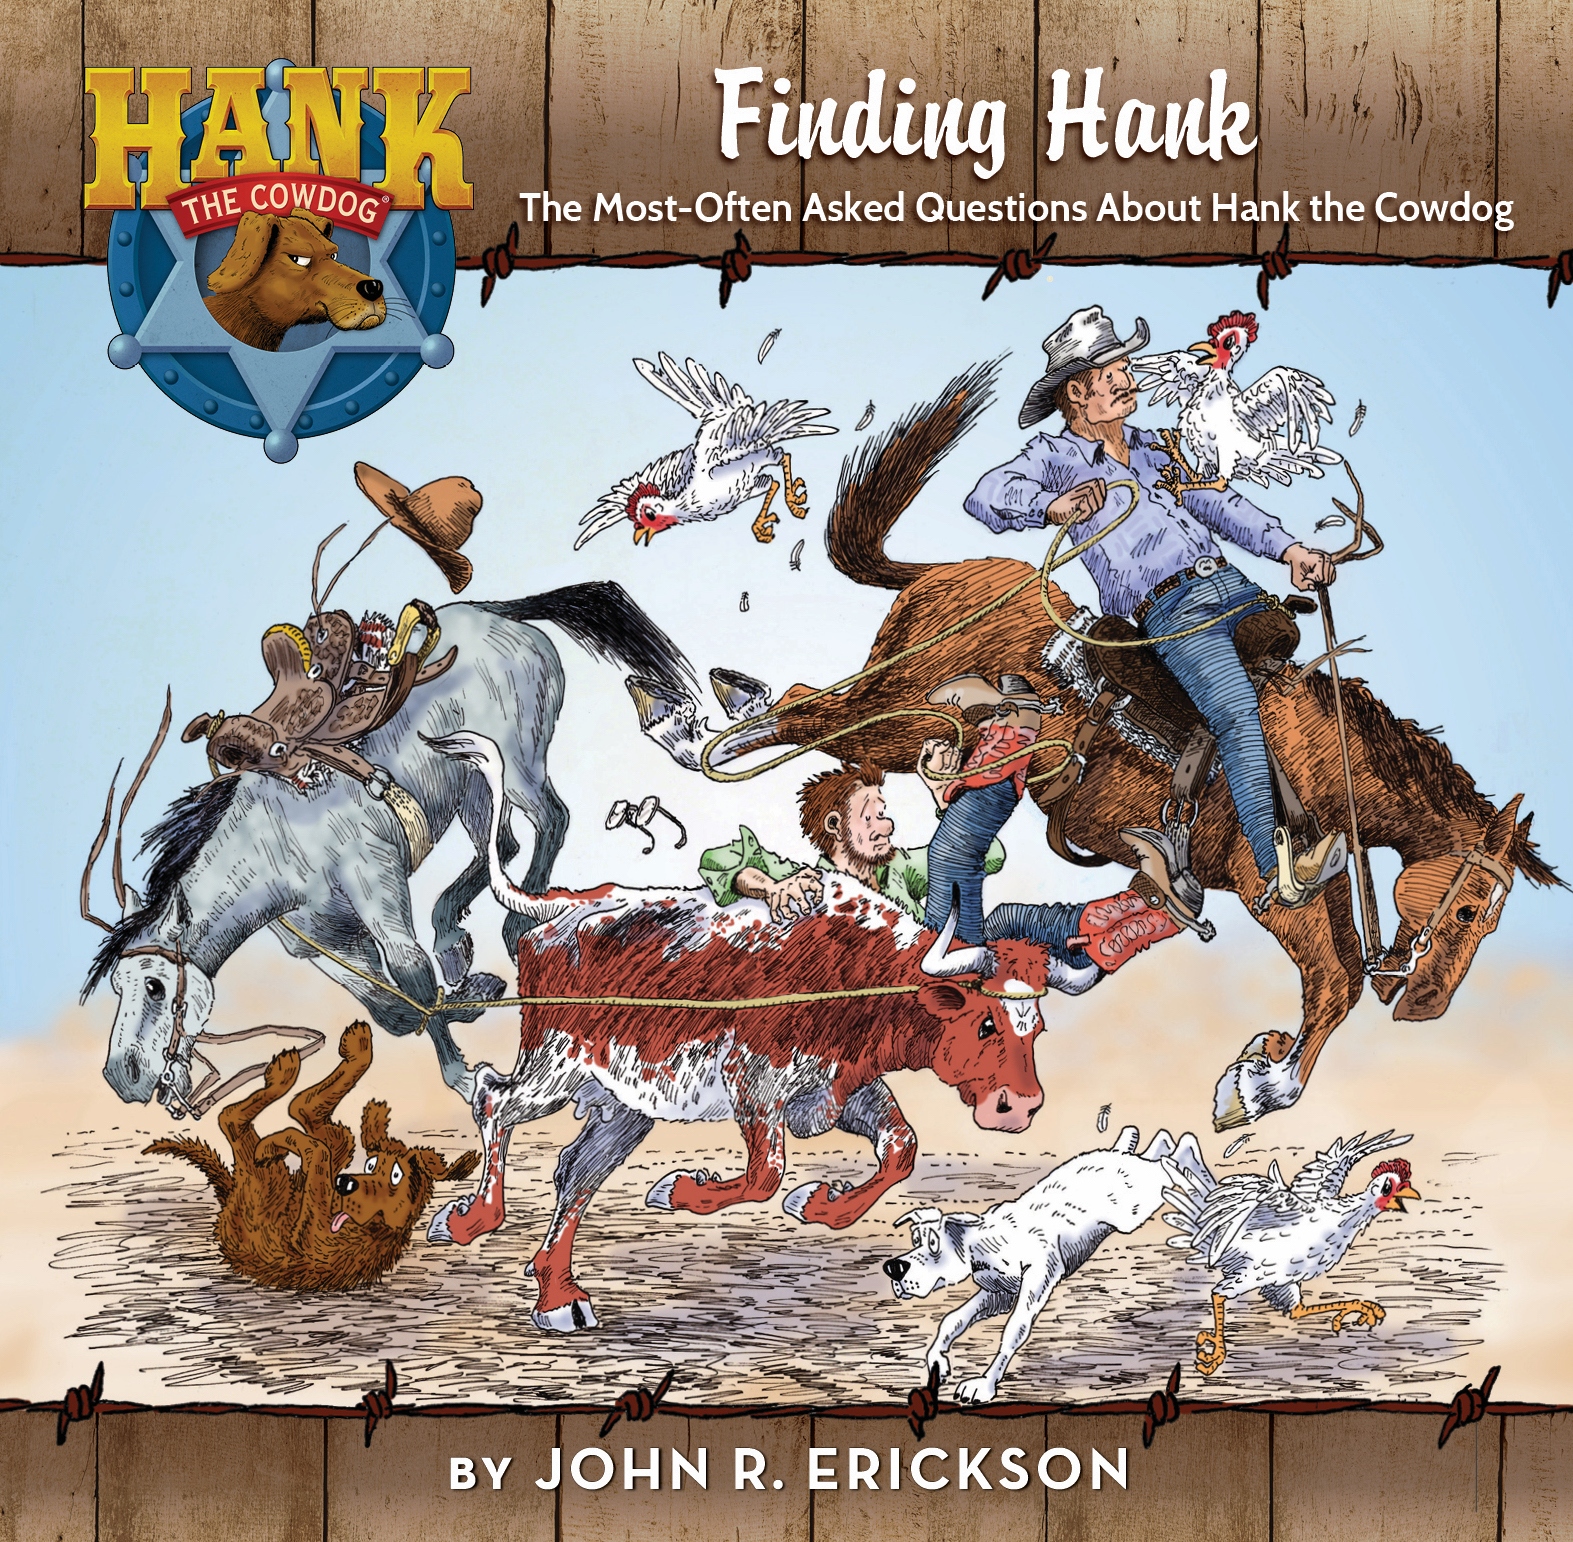 Texas Reads: John Erickson book answers questions about Hank the Cowdog